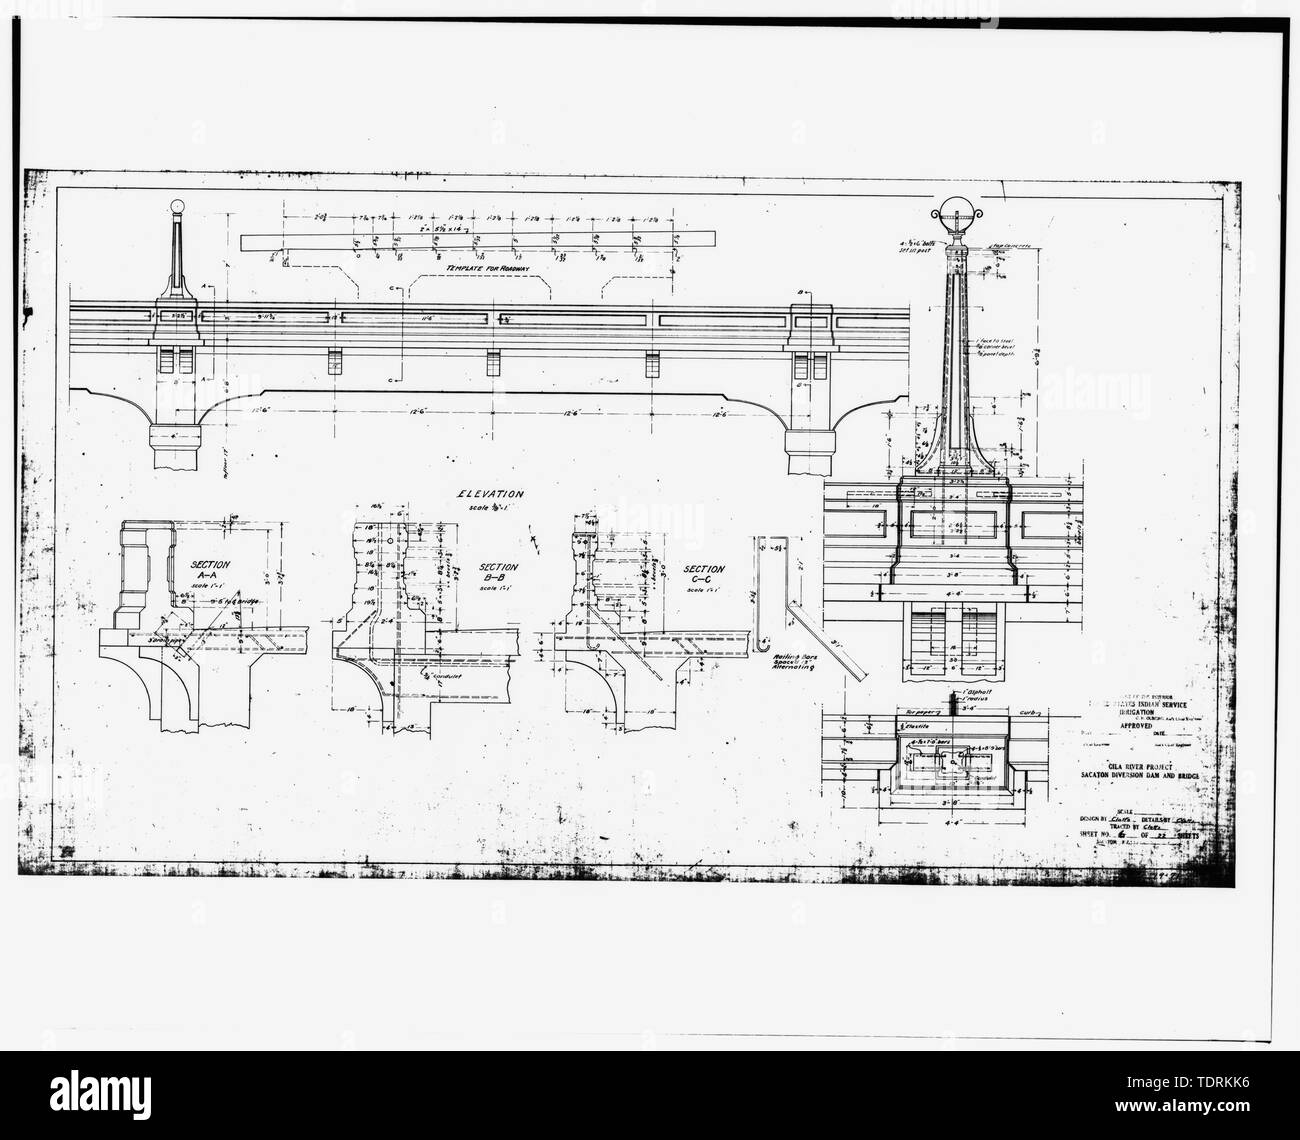 Photographic copy of construction drawing, no date, in possession of SCIP Office, Coolidge, AZ. United States Indian Service, Irrigation. Untitled. DETAIL OF BRIDGE SPAN AND LAMP POST. - San Carlos Irrigation Project, Sacaton Dam and Bridge, Gila River, T4S R6E S12-13, Coolidge, Pinal County, AZ Stock Photo